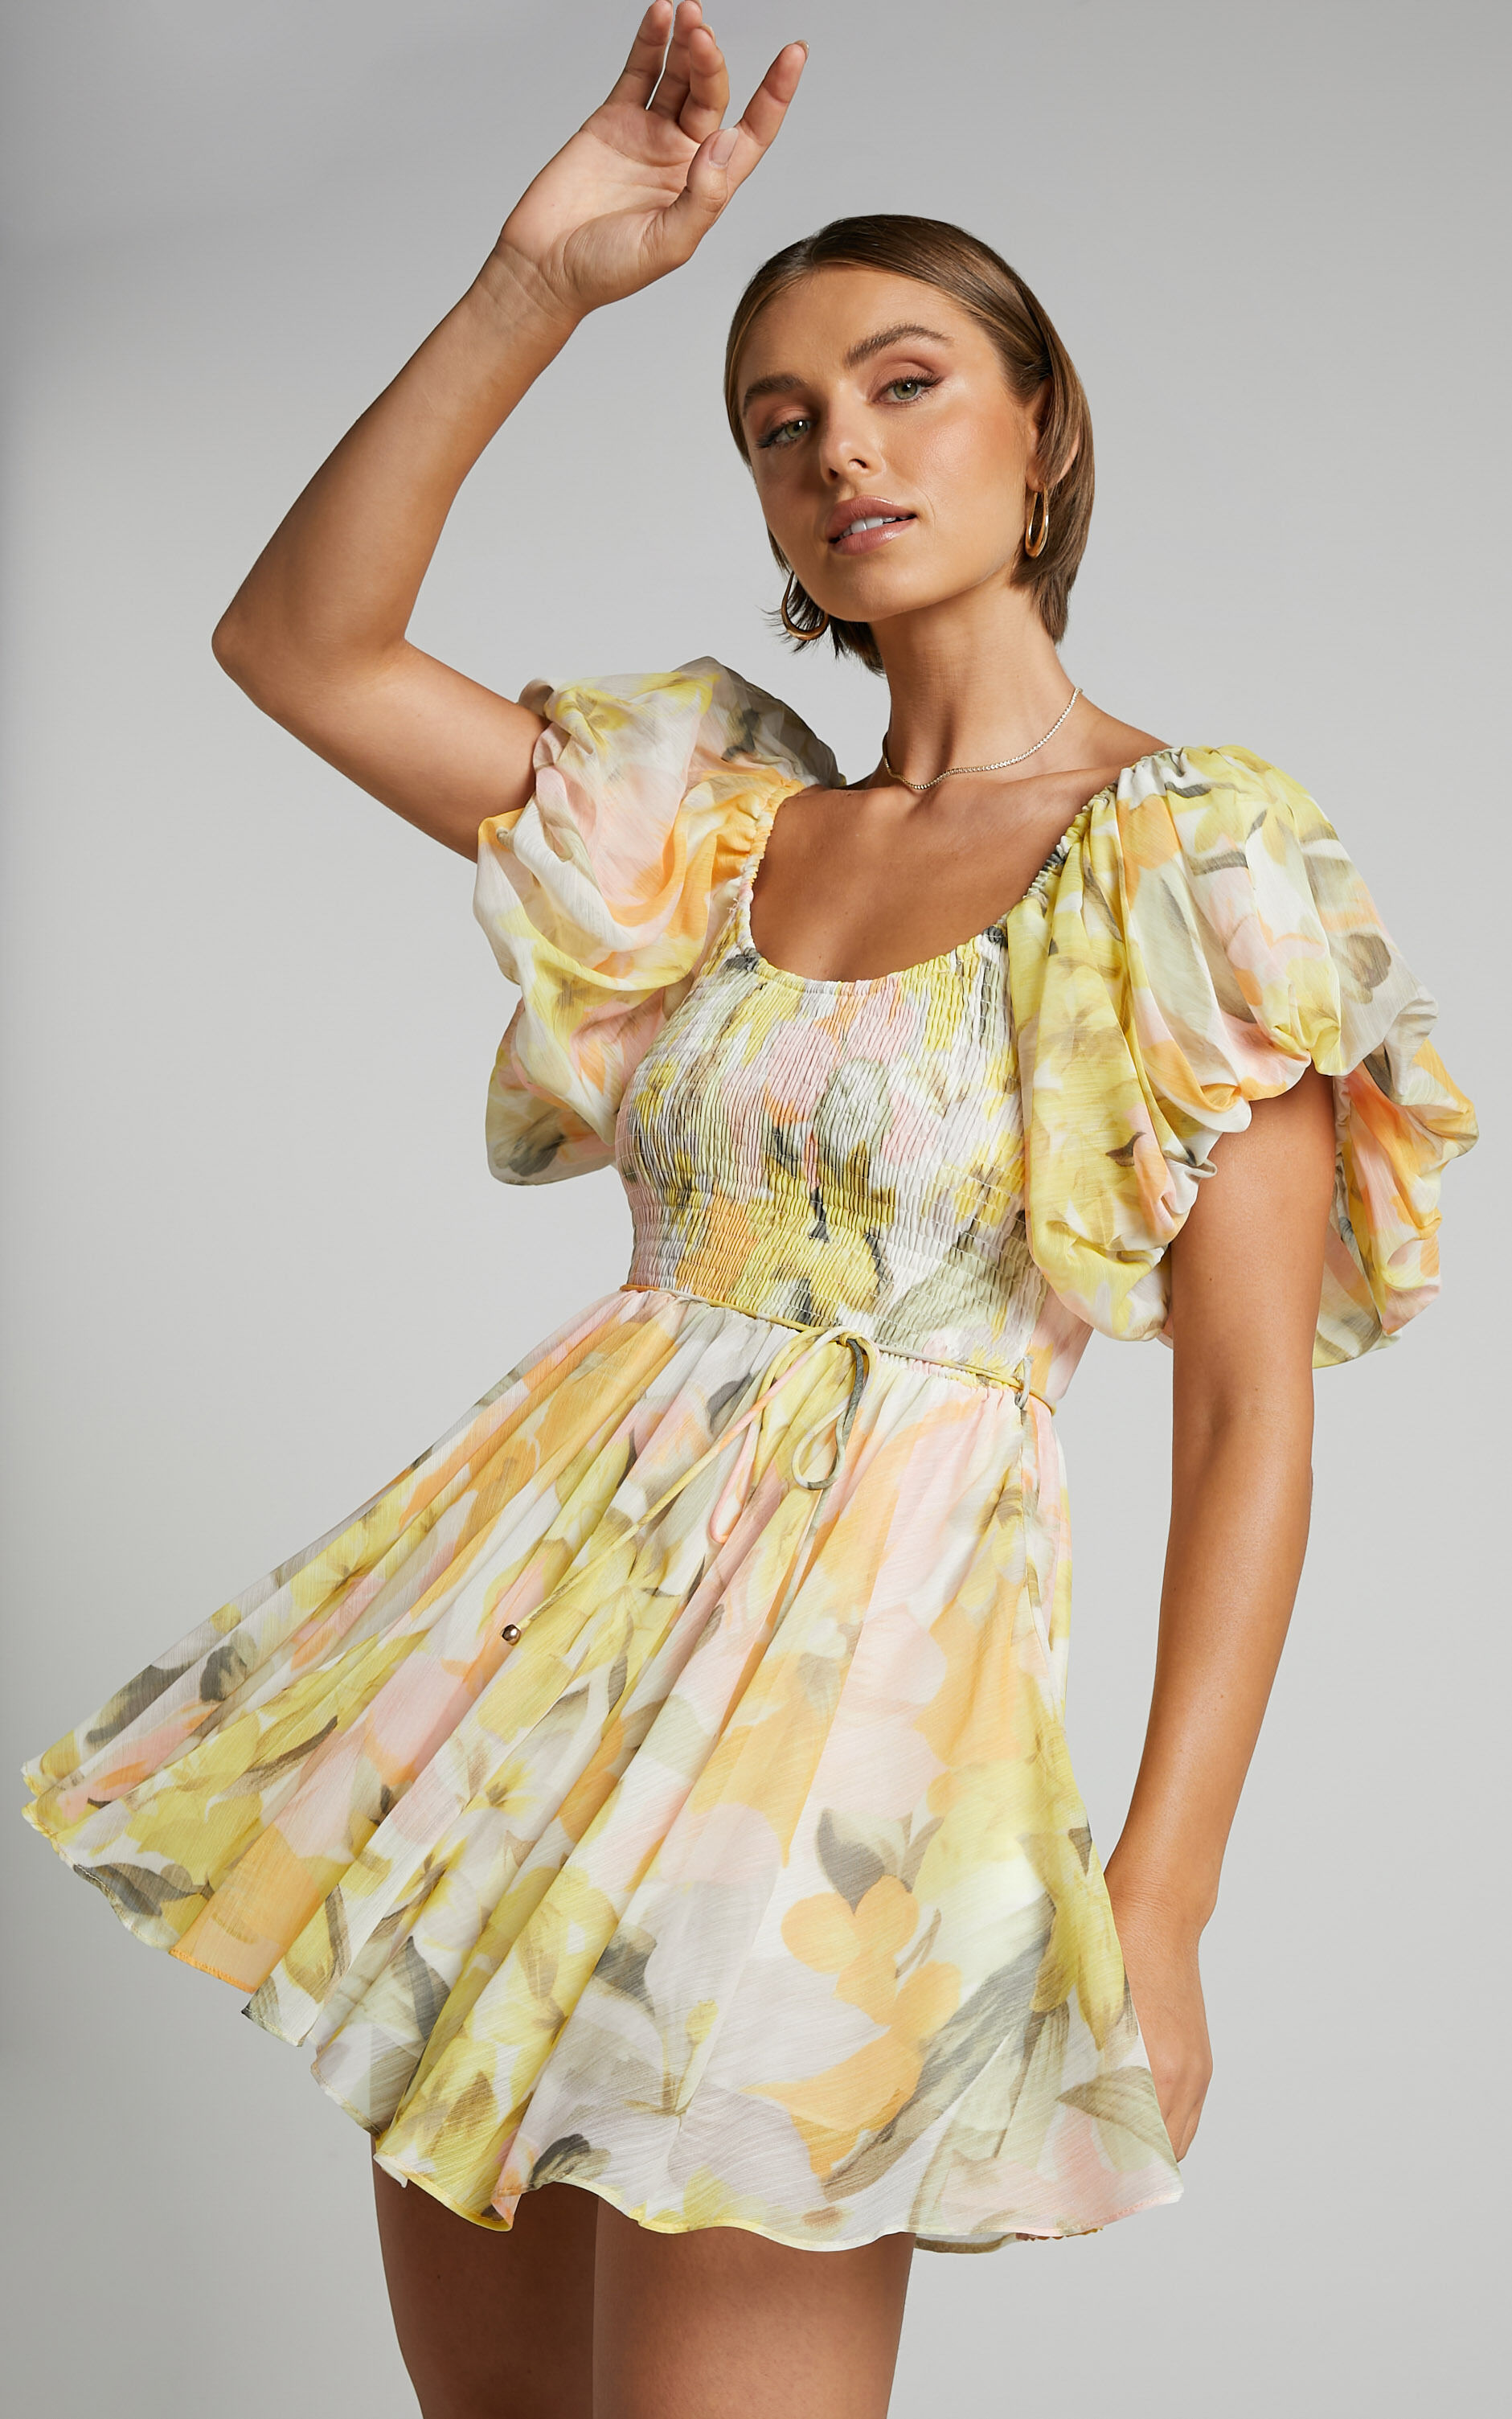 Soraia Mini Dress - Scoop Neck Puff Sleeve Gathered Dress in Yellow Floral - 06, YEL1, super-hi-res image number null